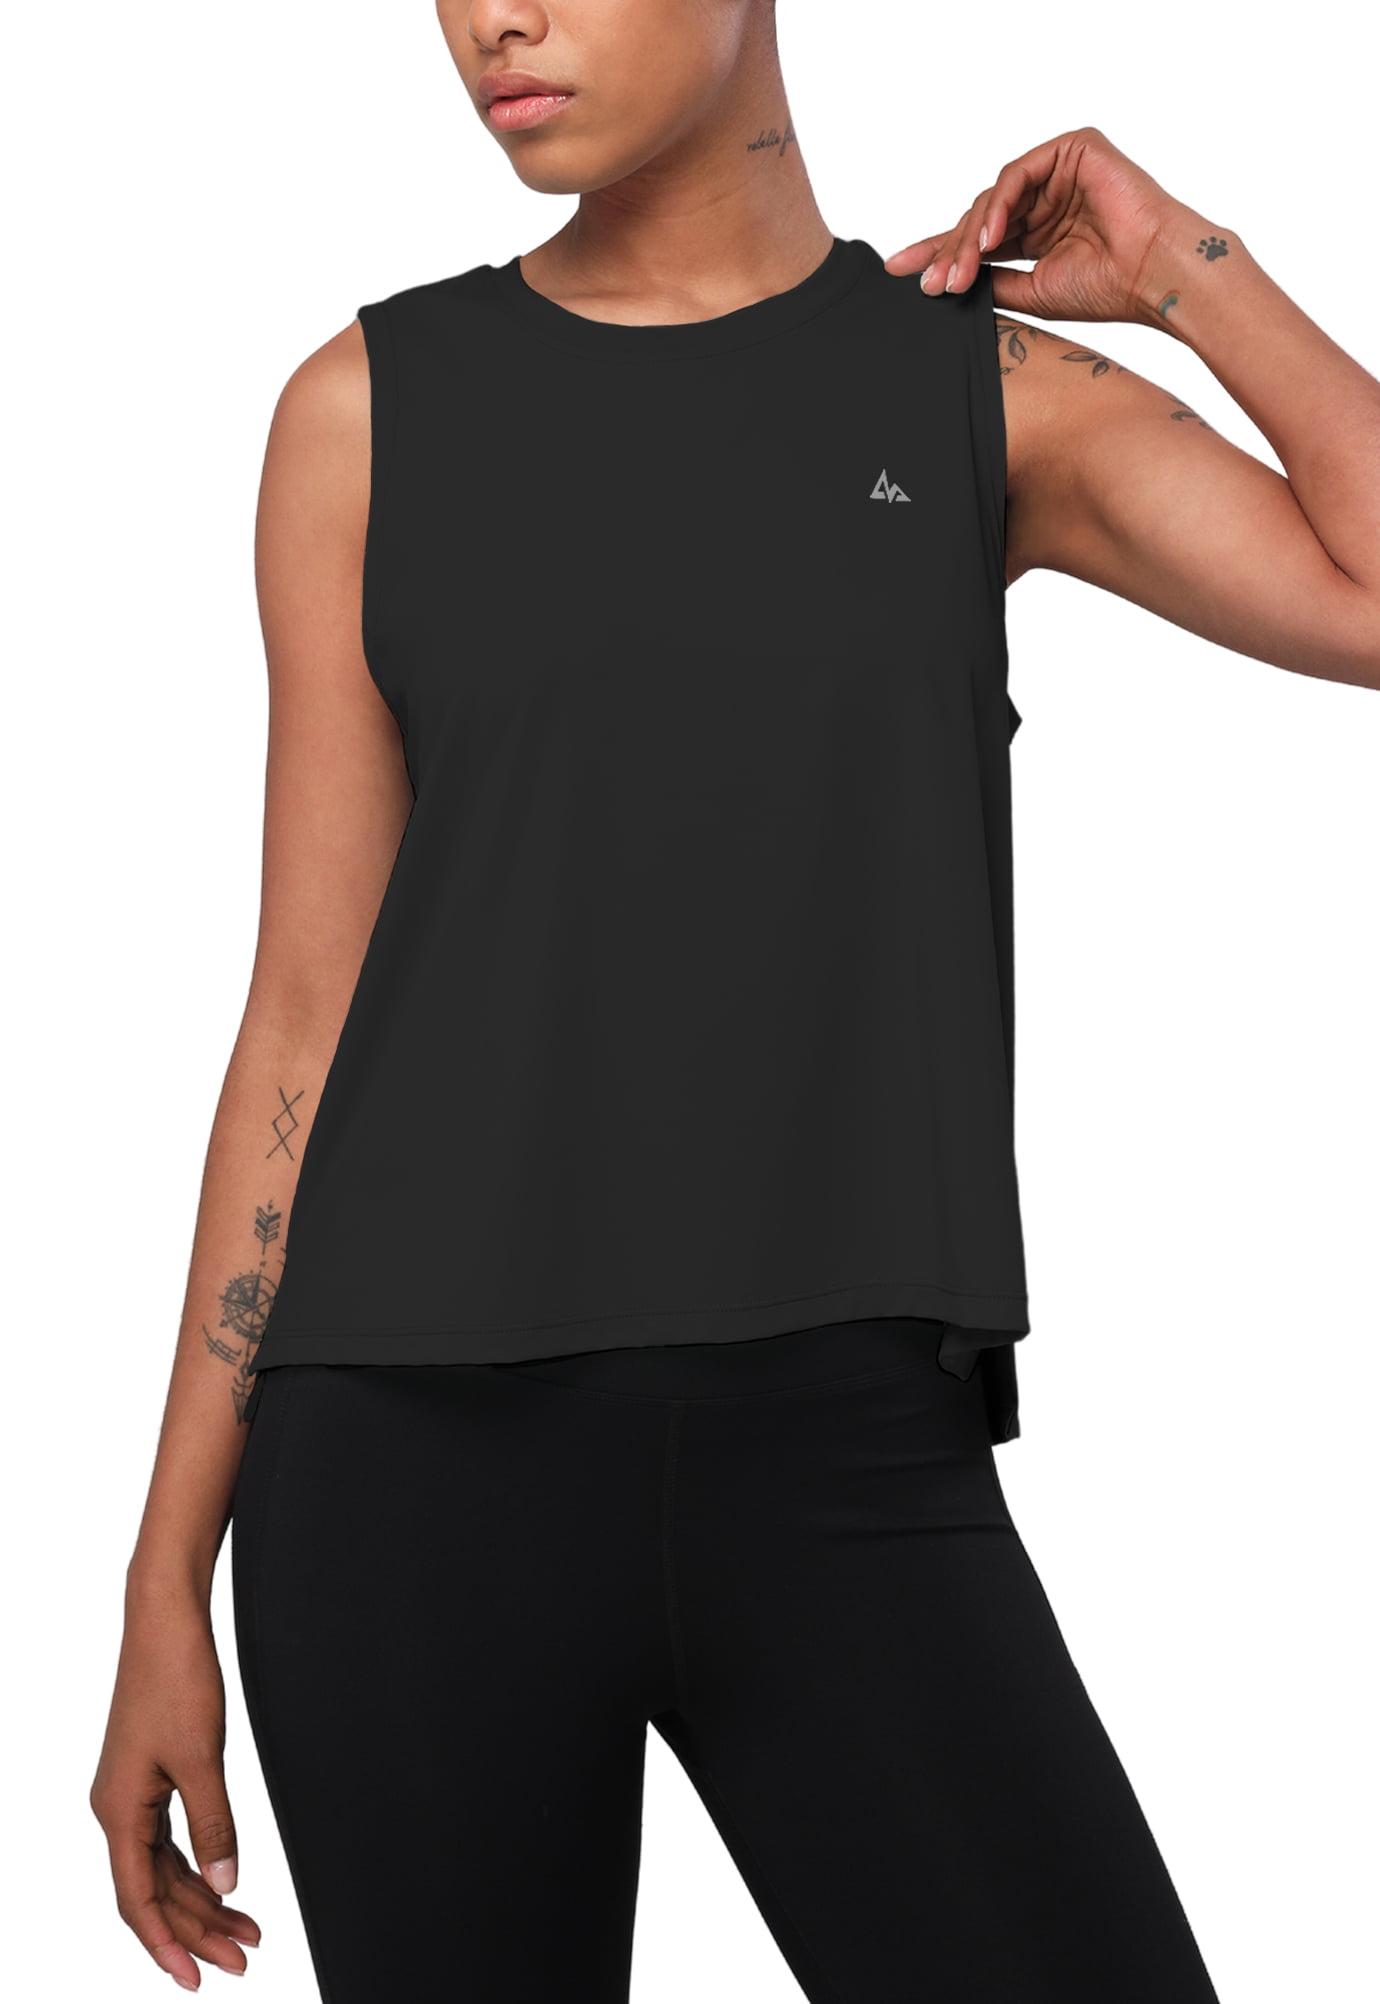 good hYOUman Womens Jessica Thankful for This Life Athletic Racerback Tank